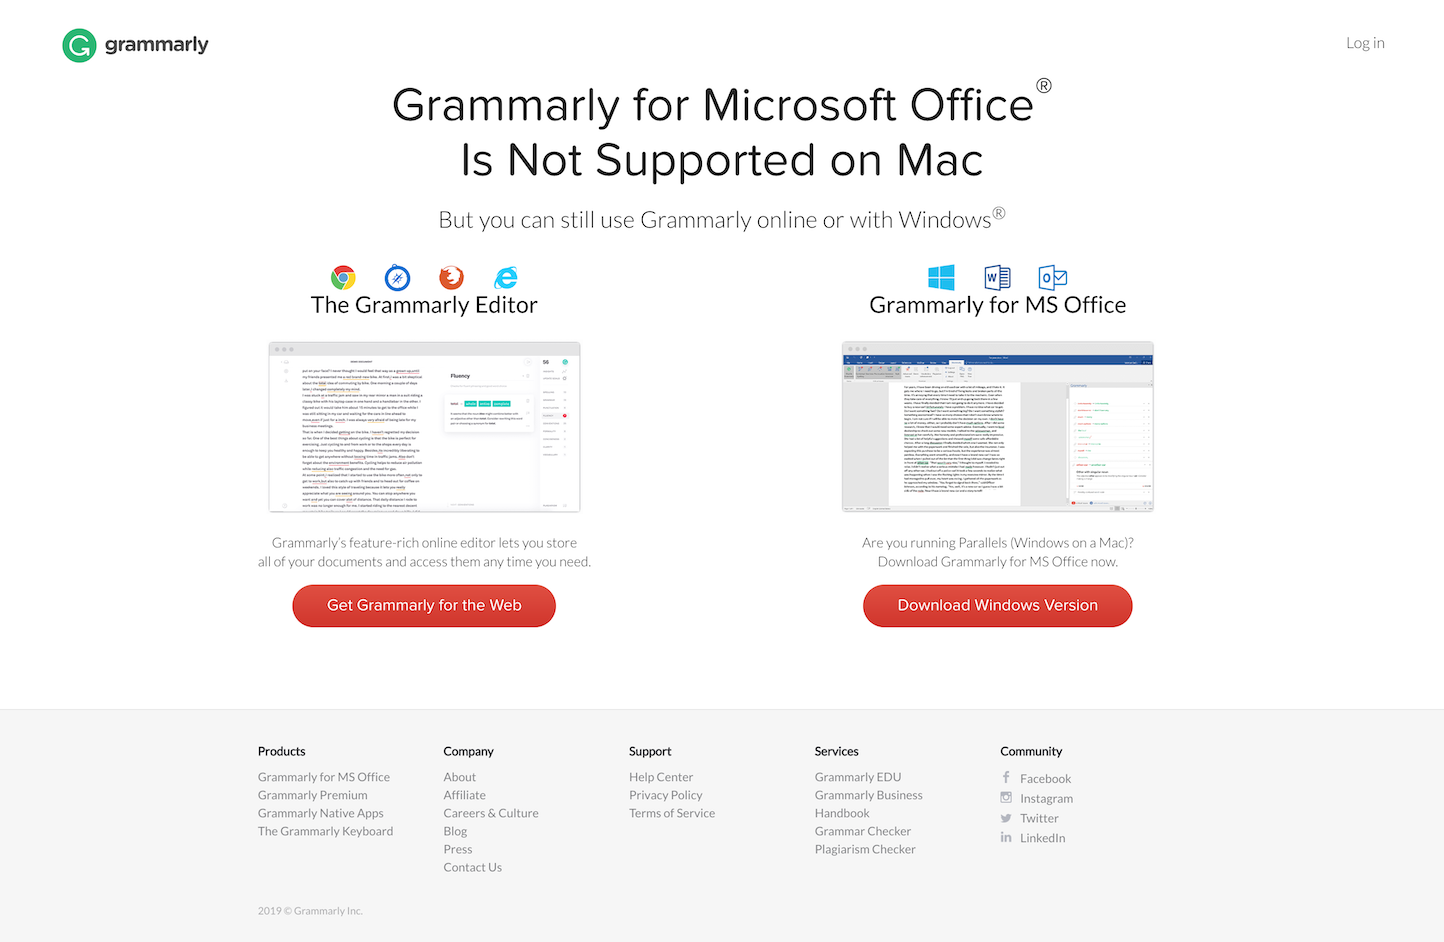 Screenshot of the Product - Grammarly for Office page from the Grammarly website.